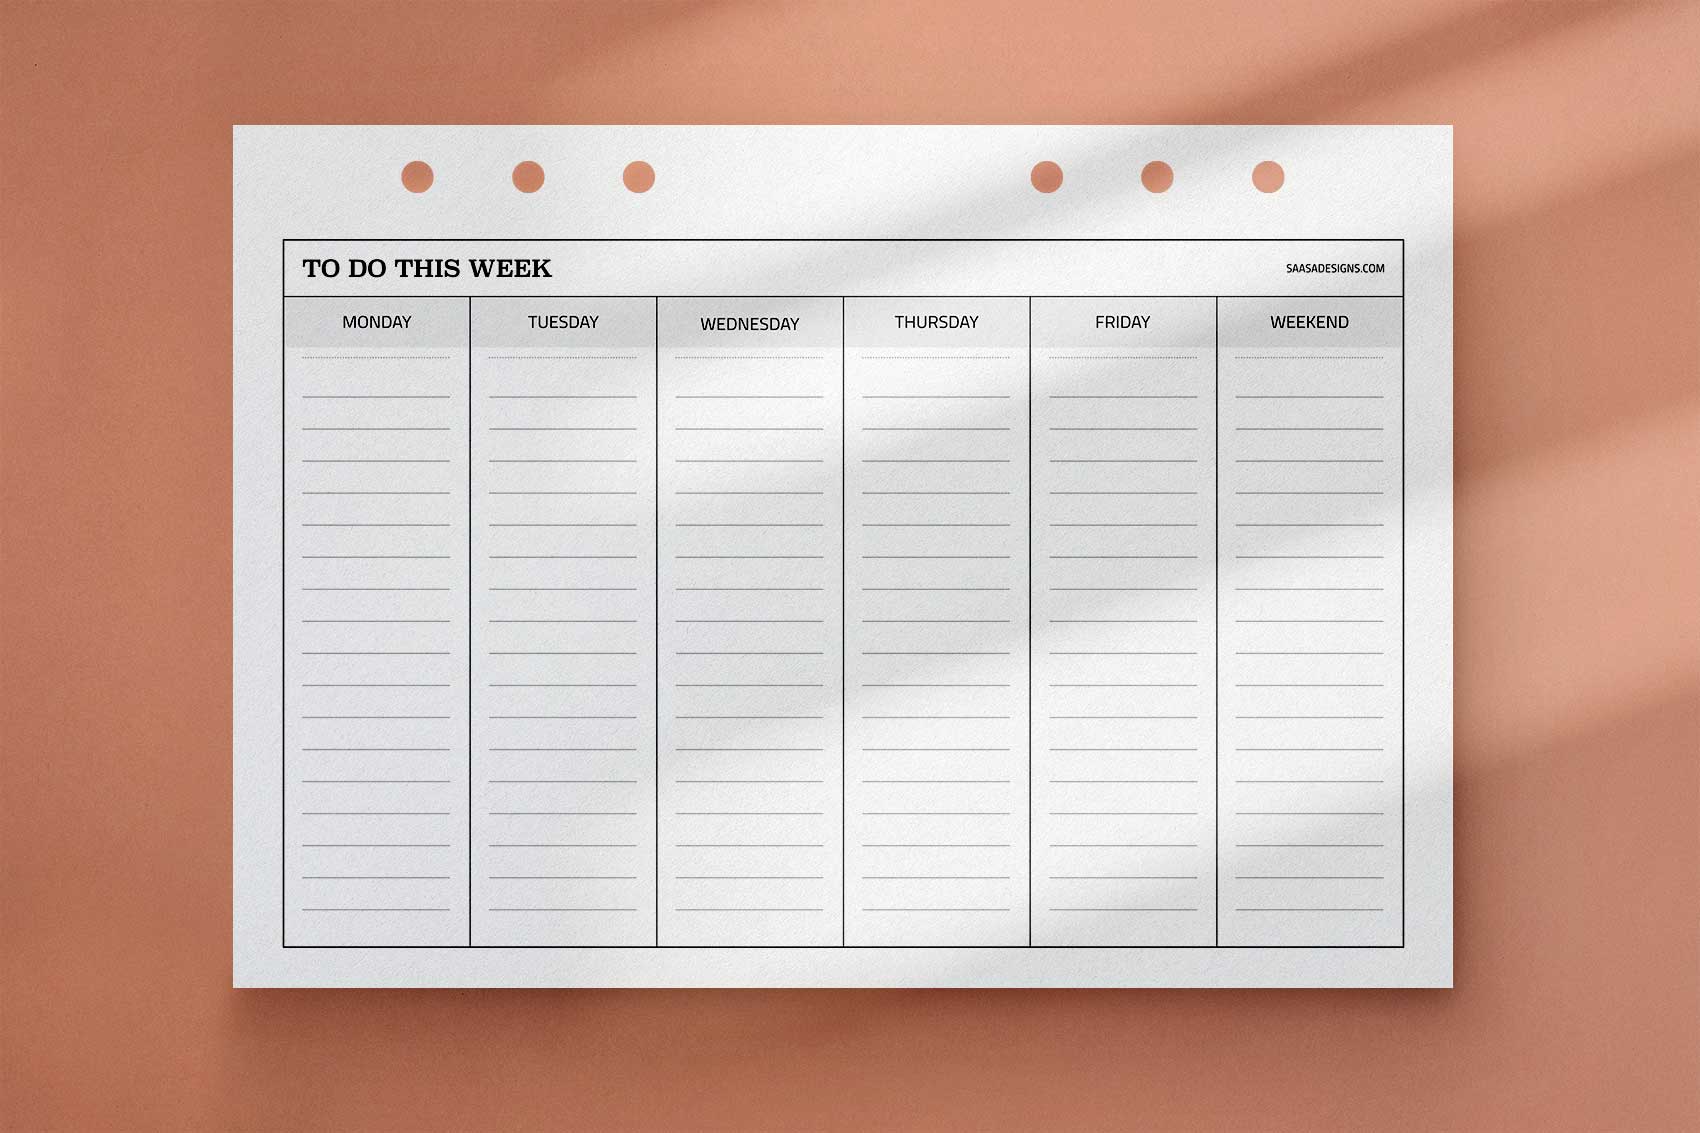 weekly-to-do-list-template